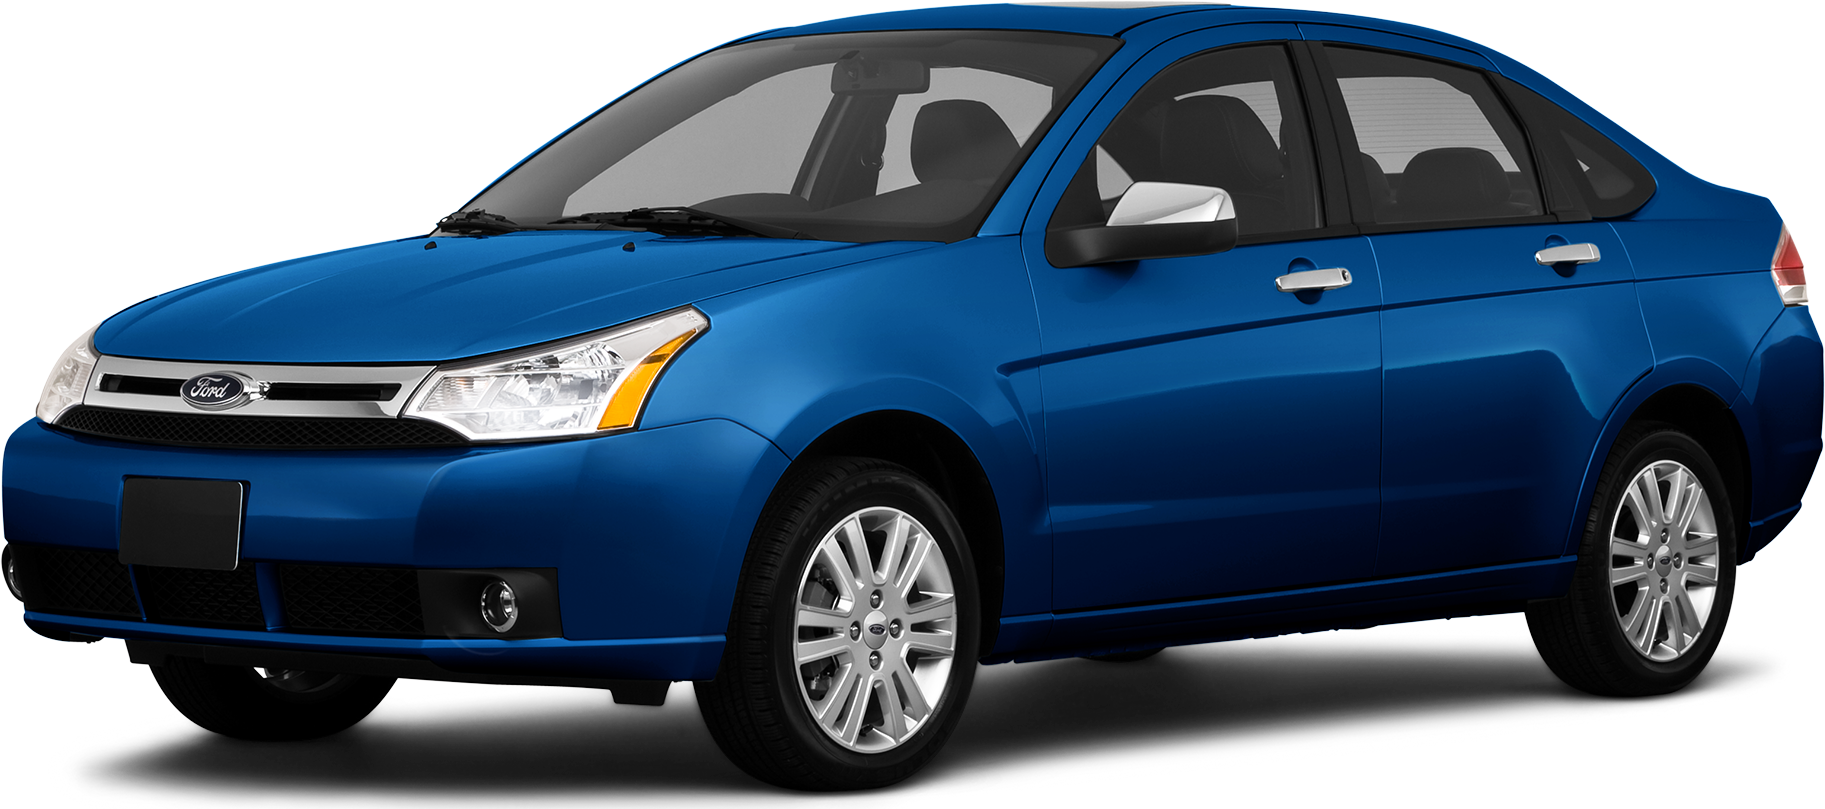 2010 Ford Fusion Pricing Reviews Ratings Kelley Blue Book